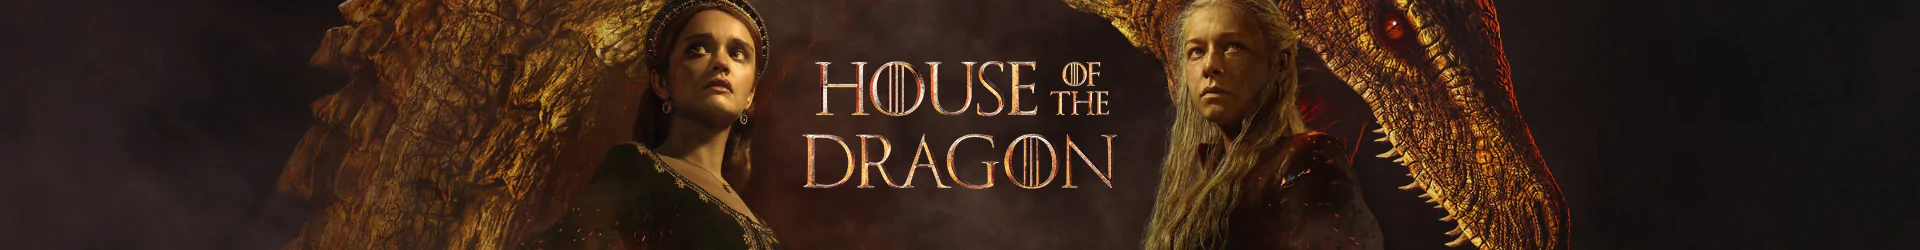 House of the Dragon lamps banner